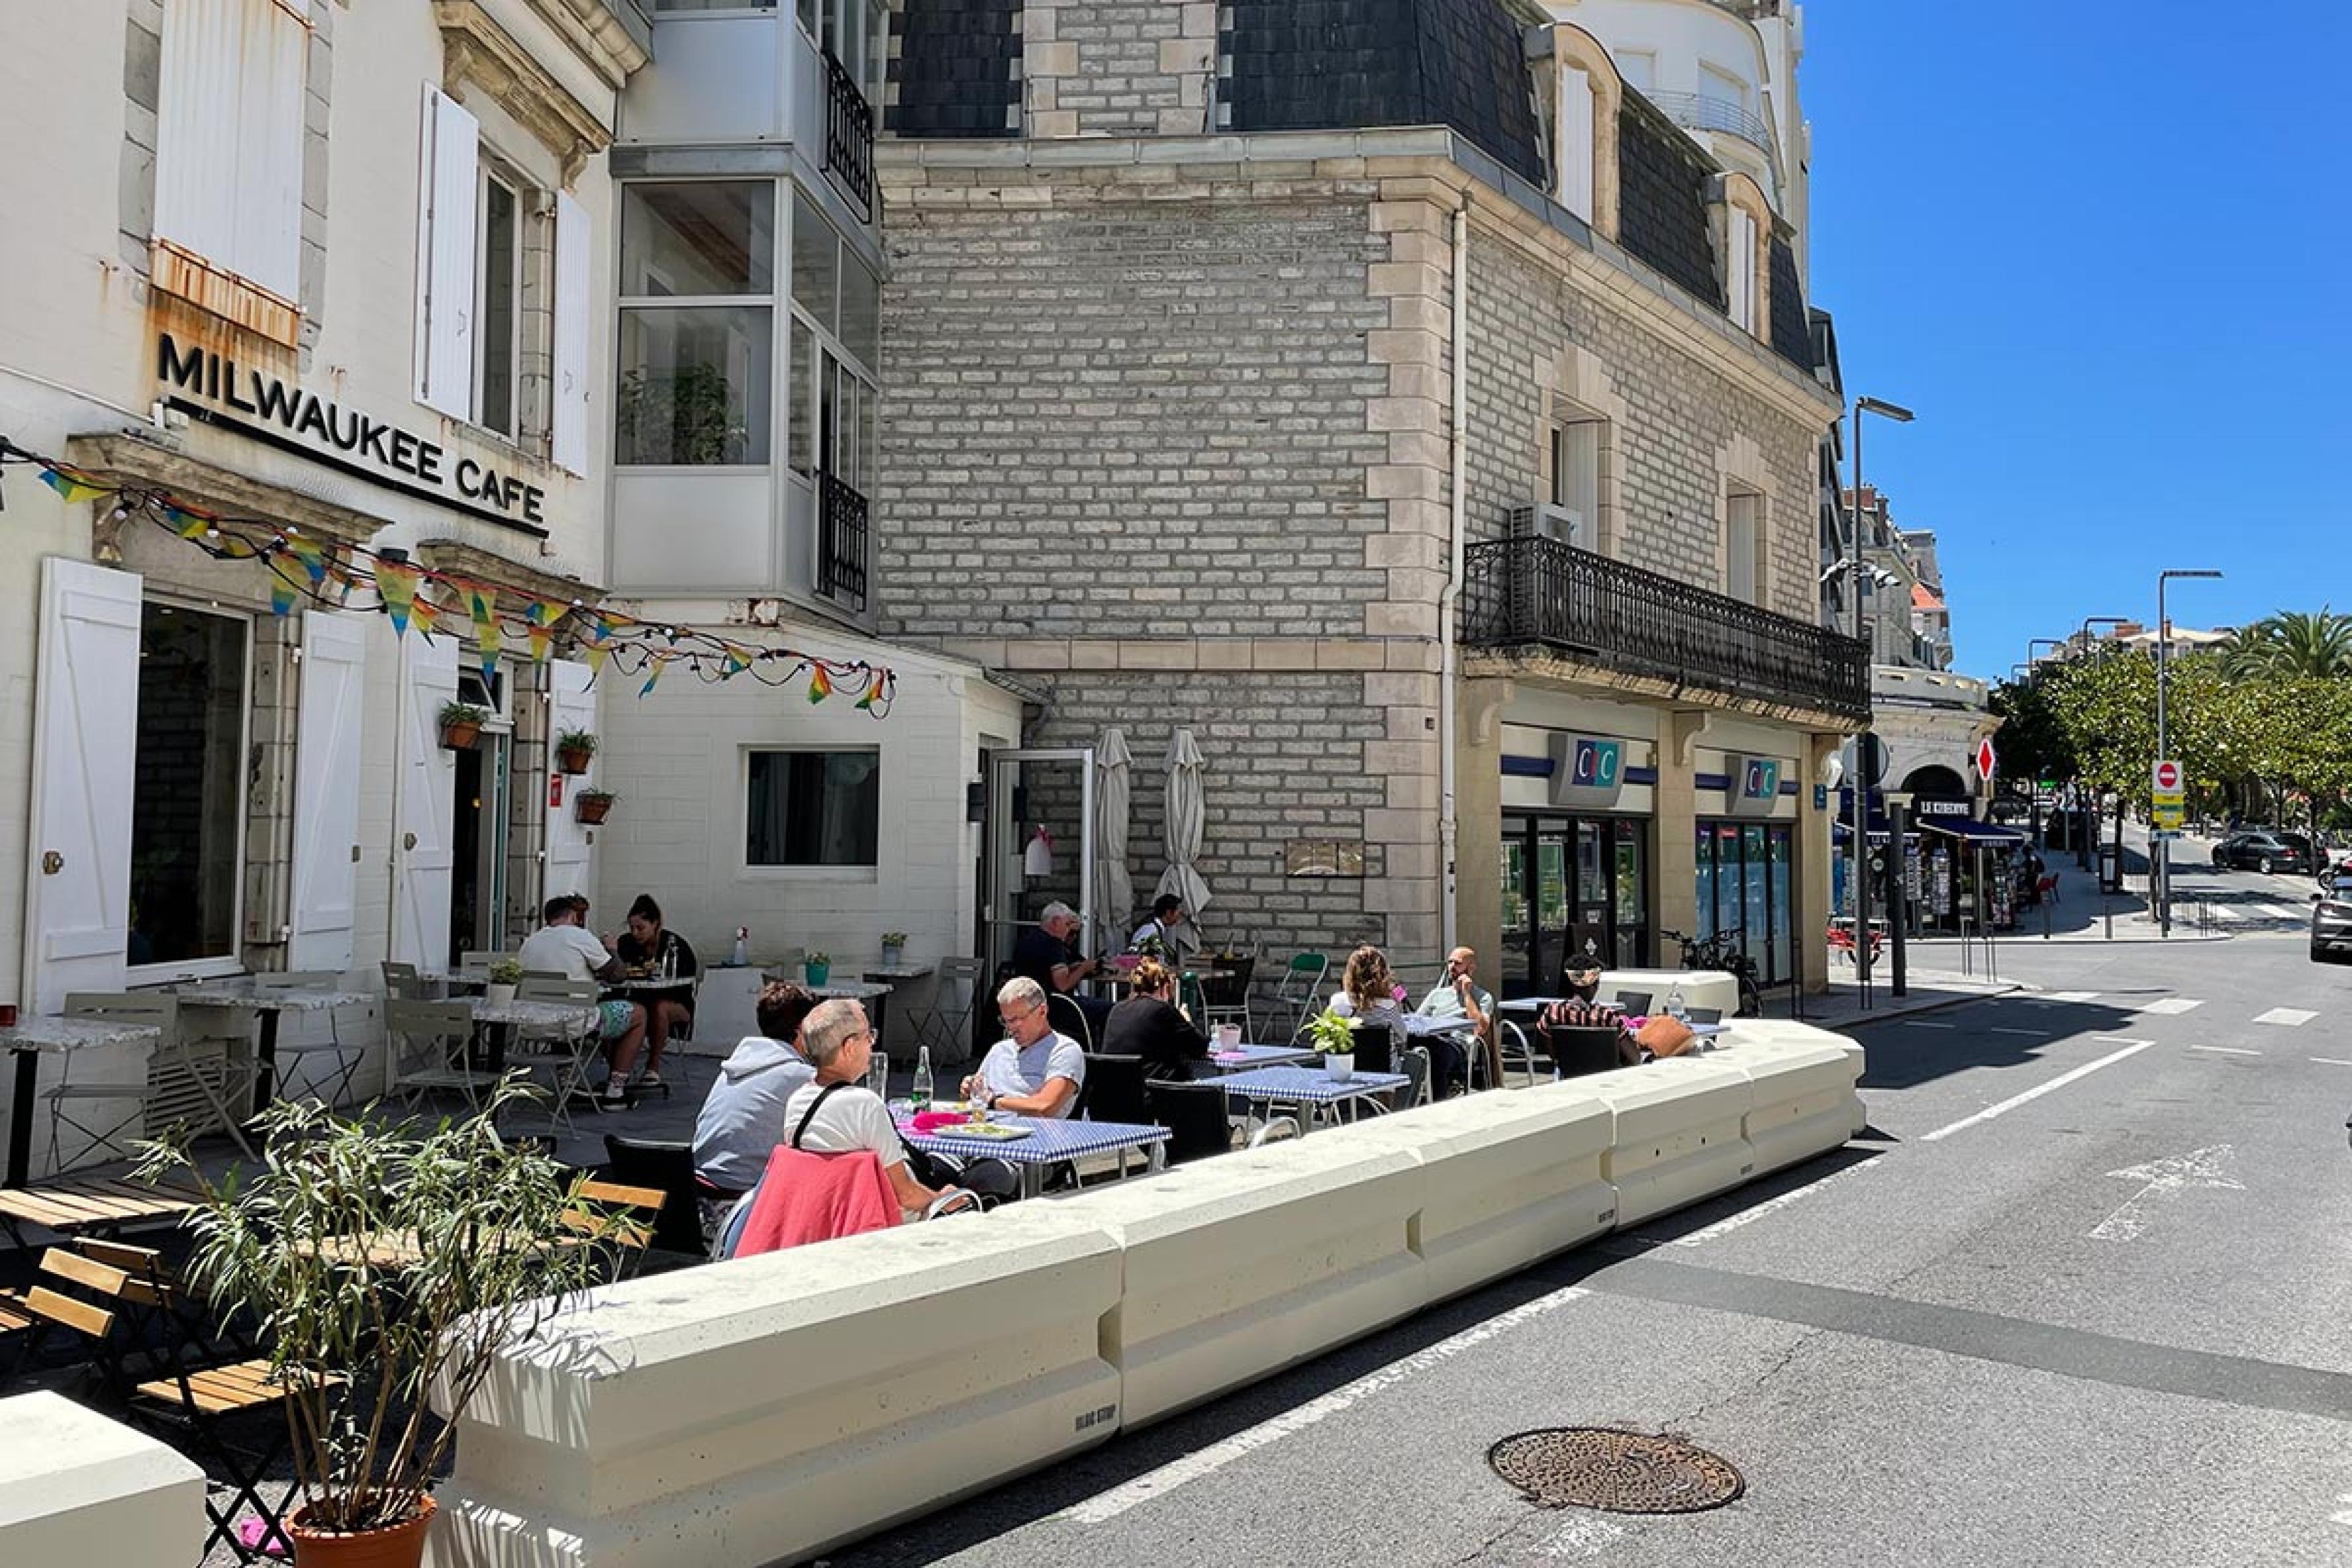 exterior of cafe on a street corner in france on a sunny day